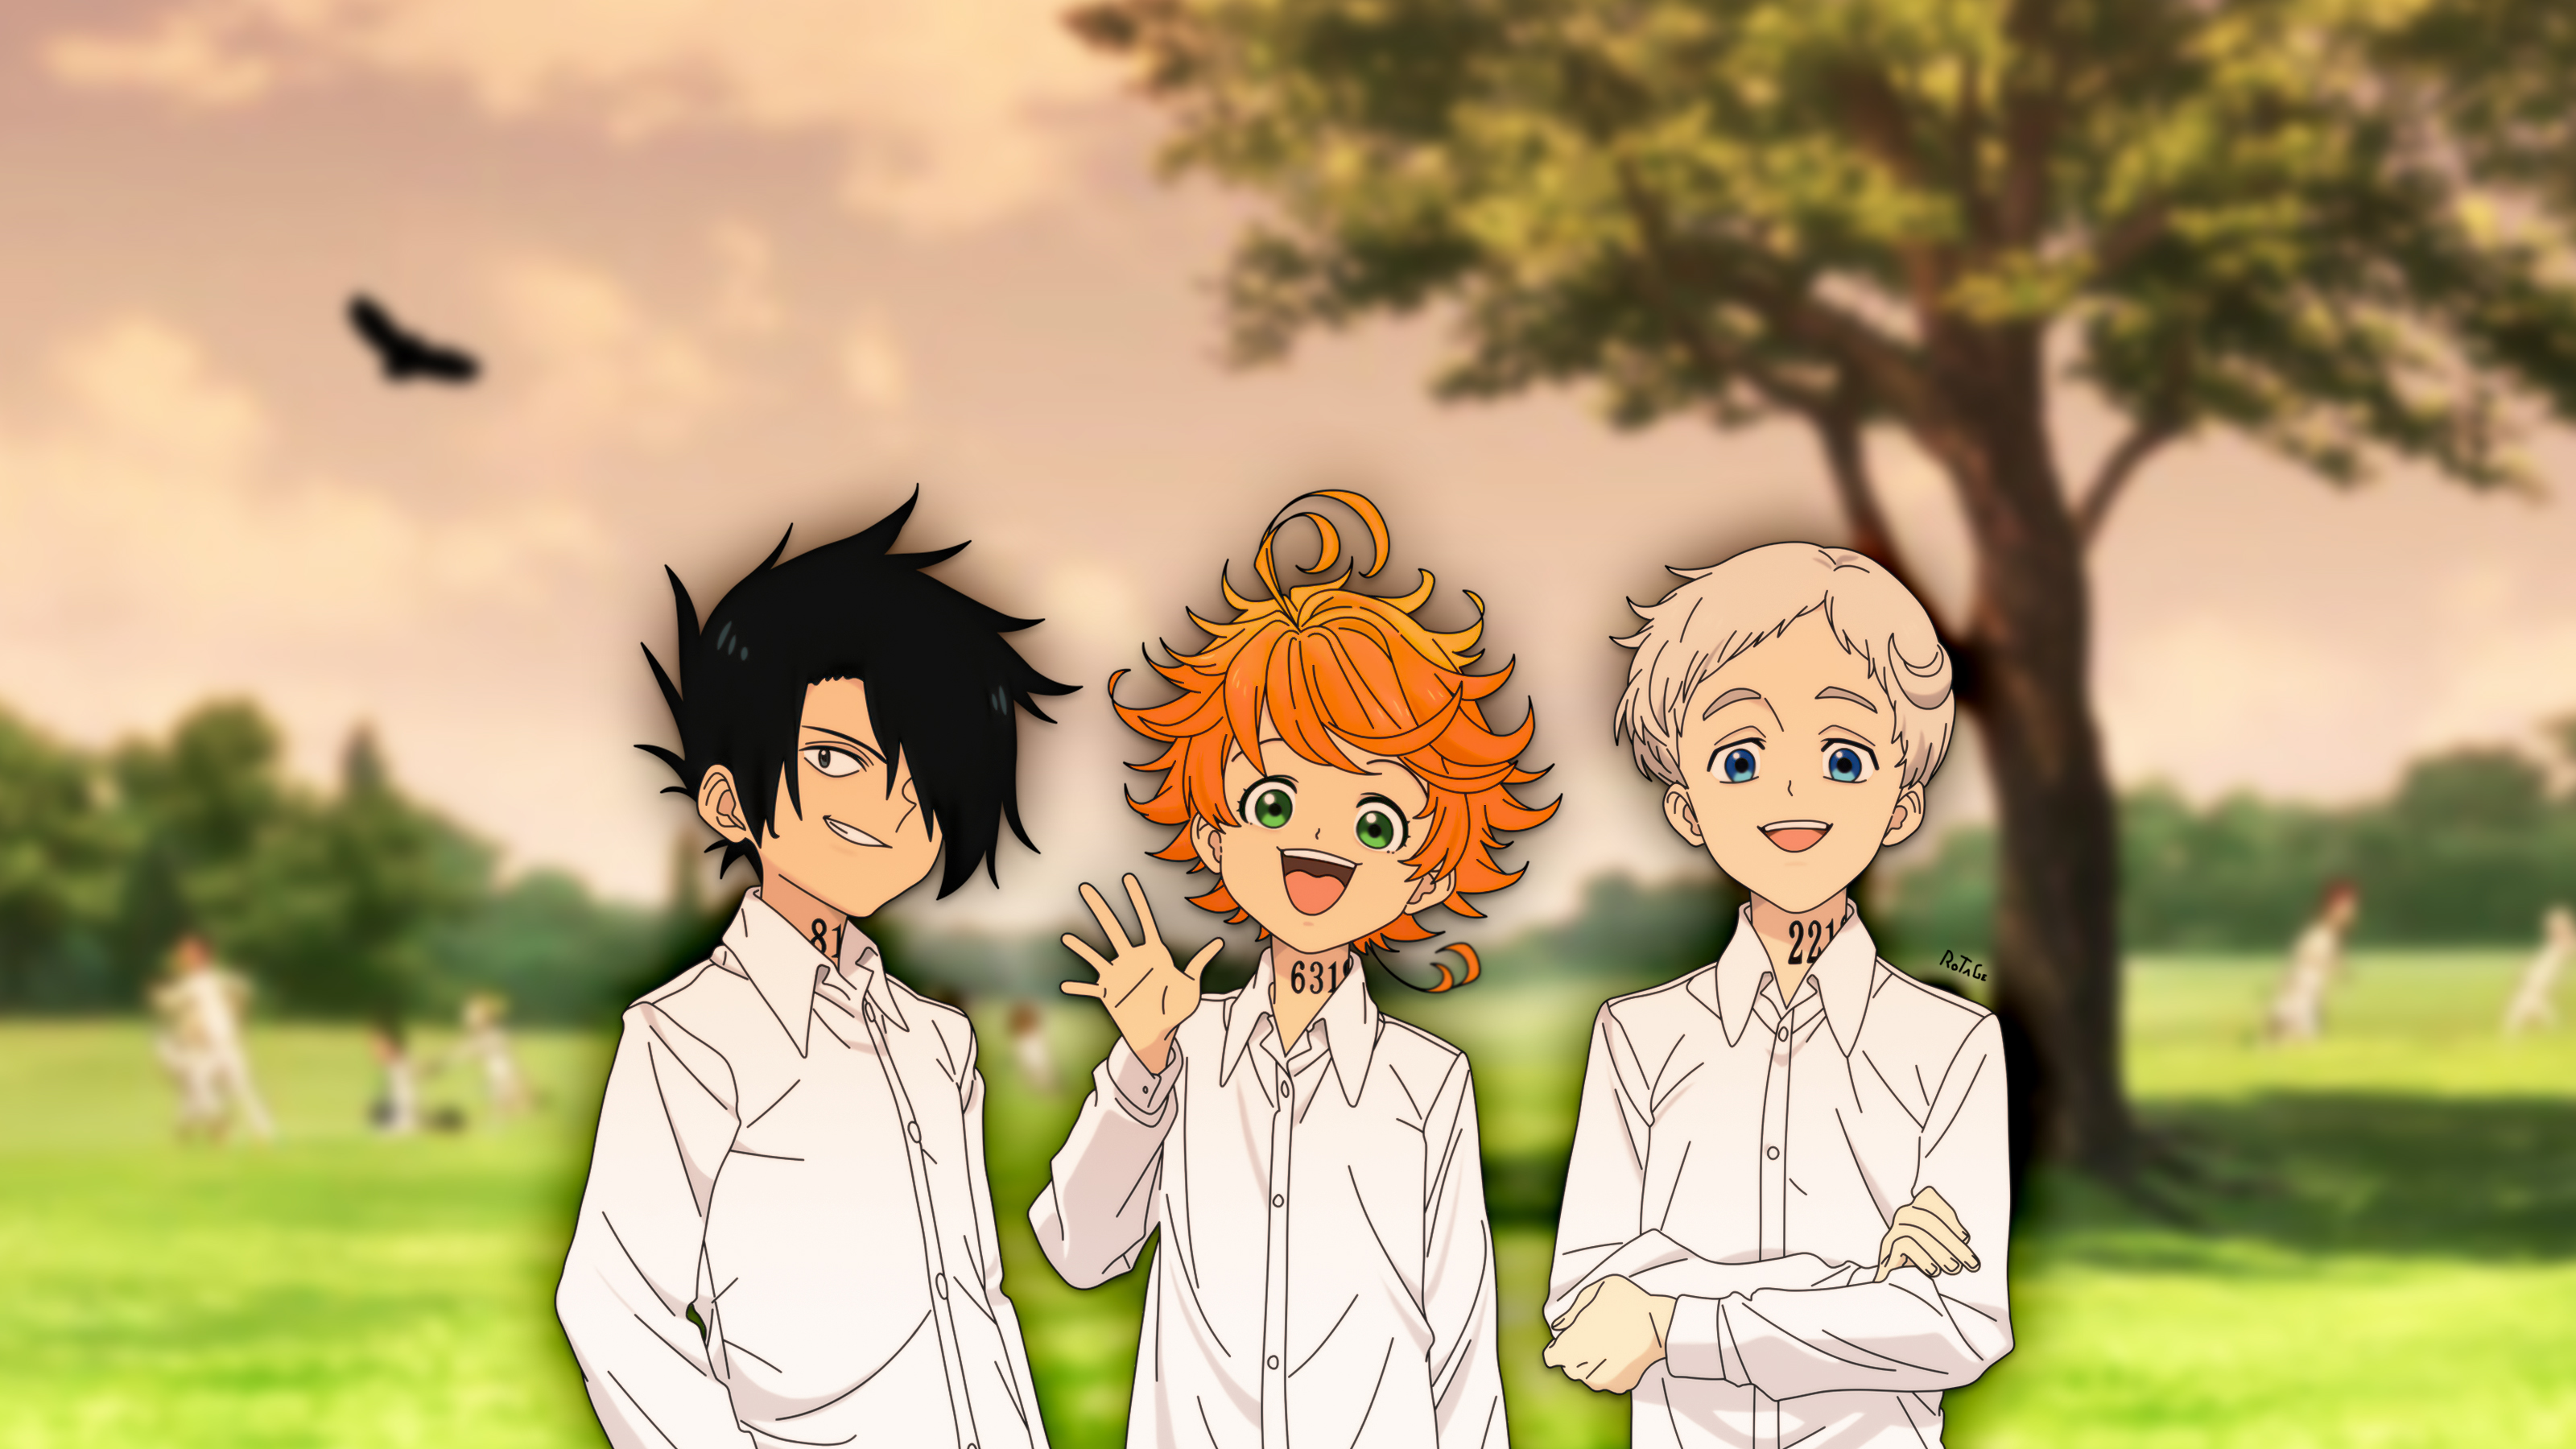 30+ Norman (The Promised Neverland) HD Wallpapers and Backgrounds